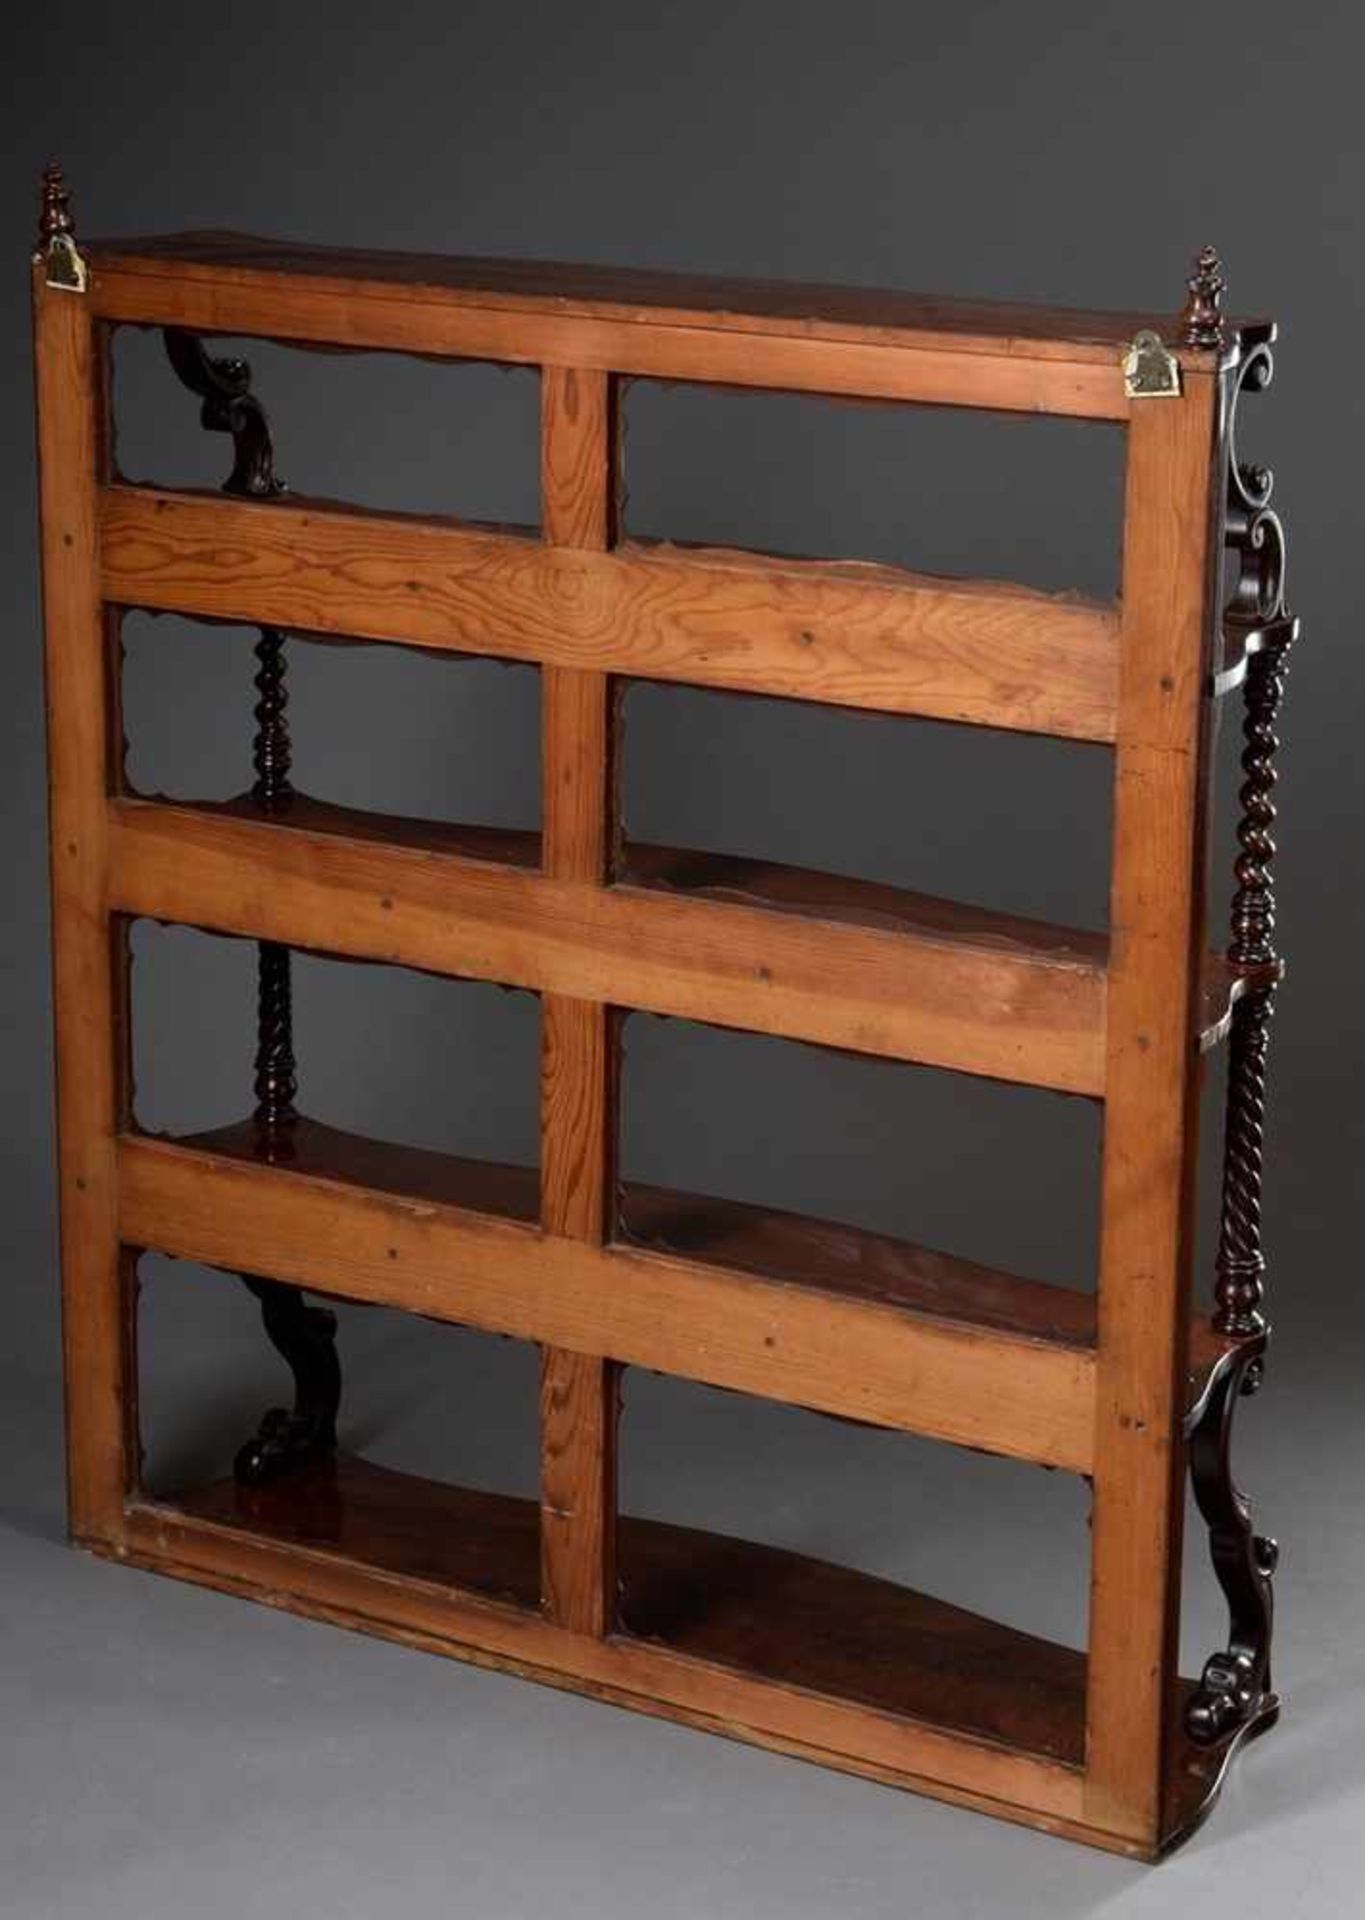 Late Biedermeier wall shelf with turned columns and 5 shelves, mahogany, end of 19th century, - Image 3 of 5